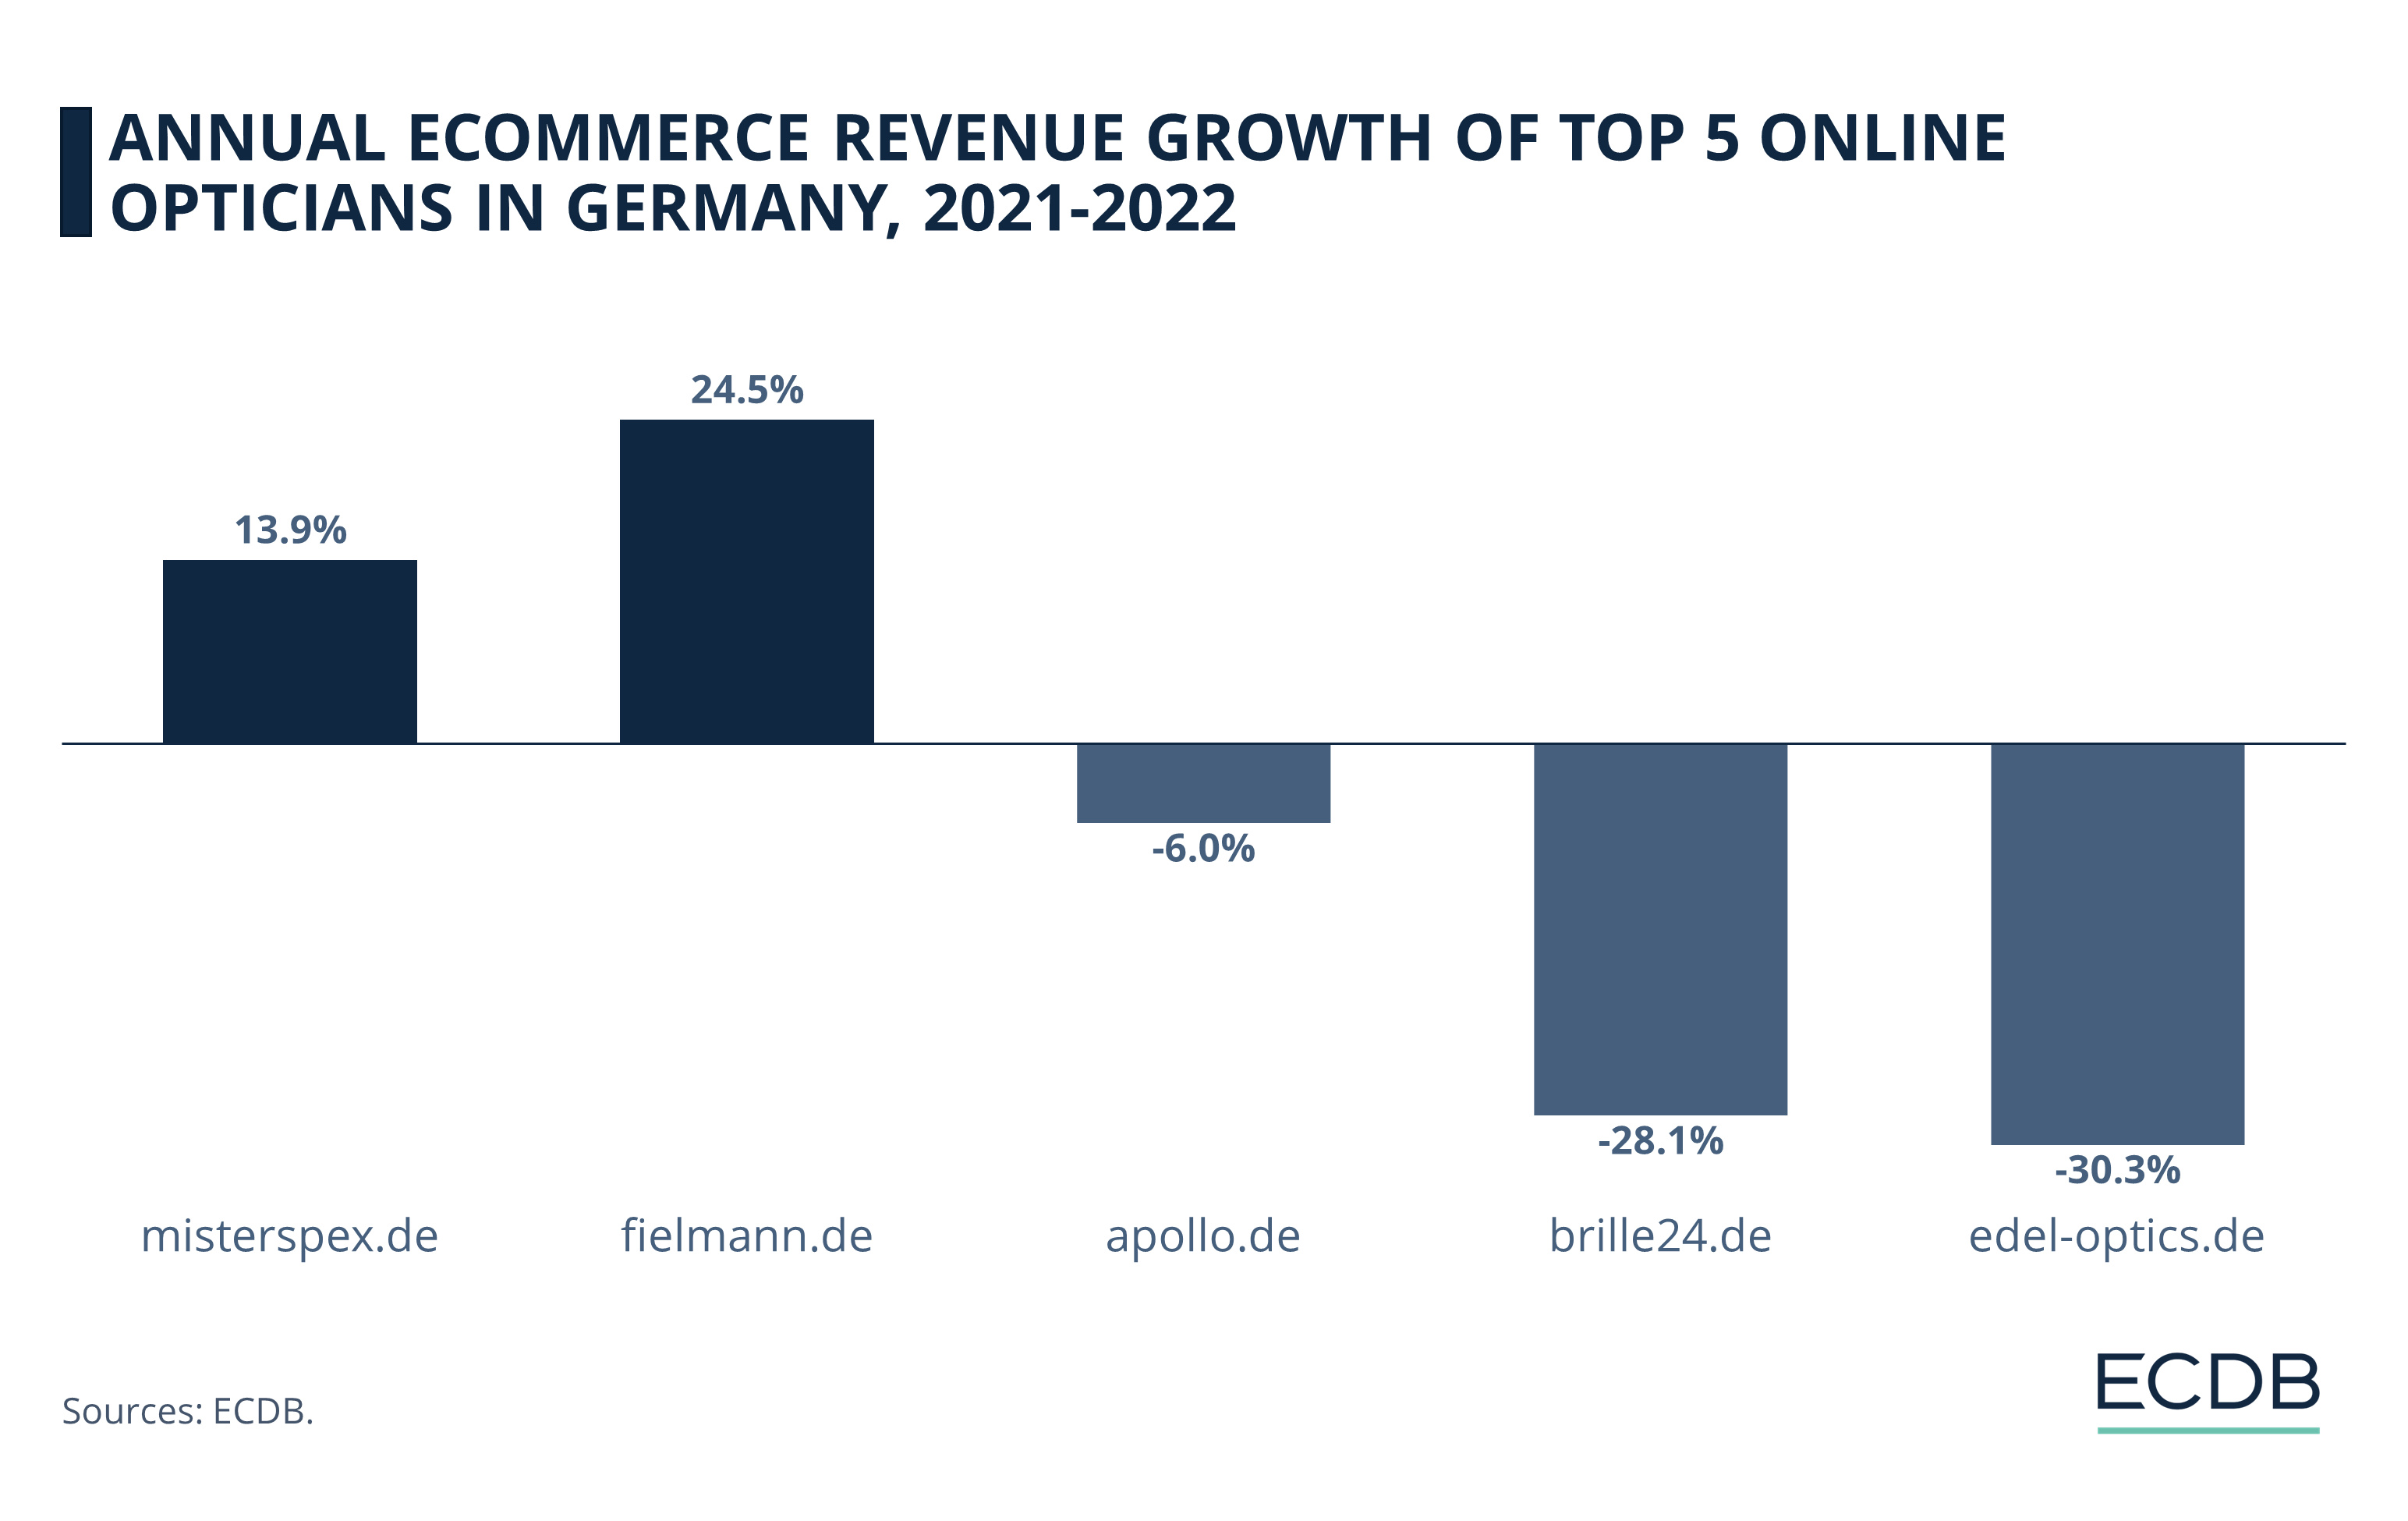 Annual eCommerce Revenue Growth of Top Five Online Opticians in Germany, 2021-2022